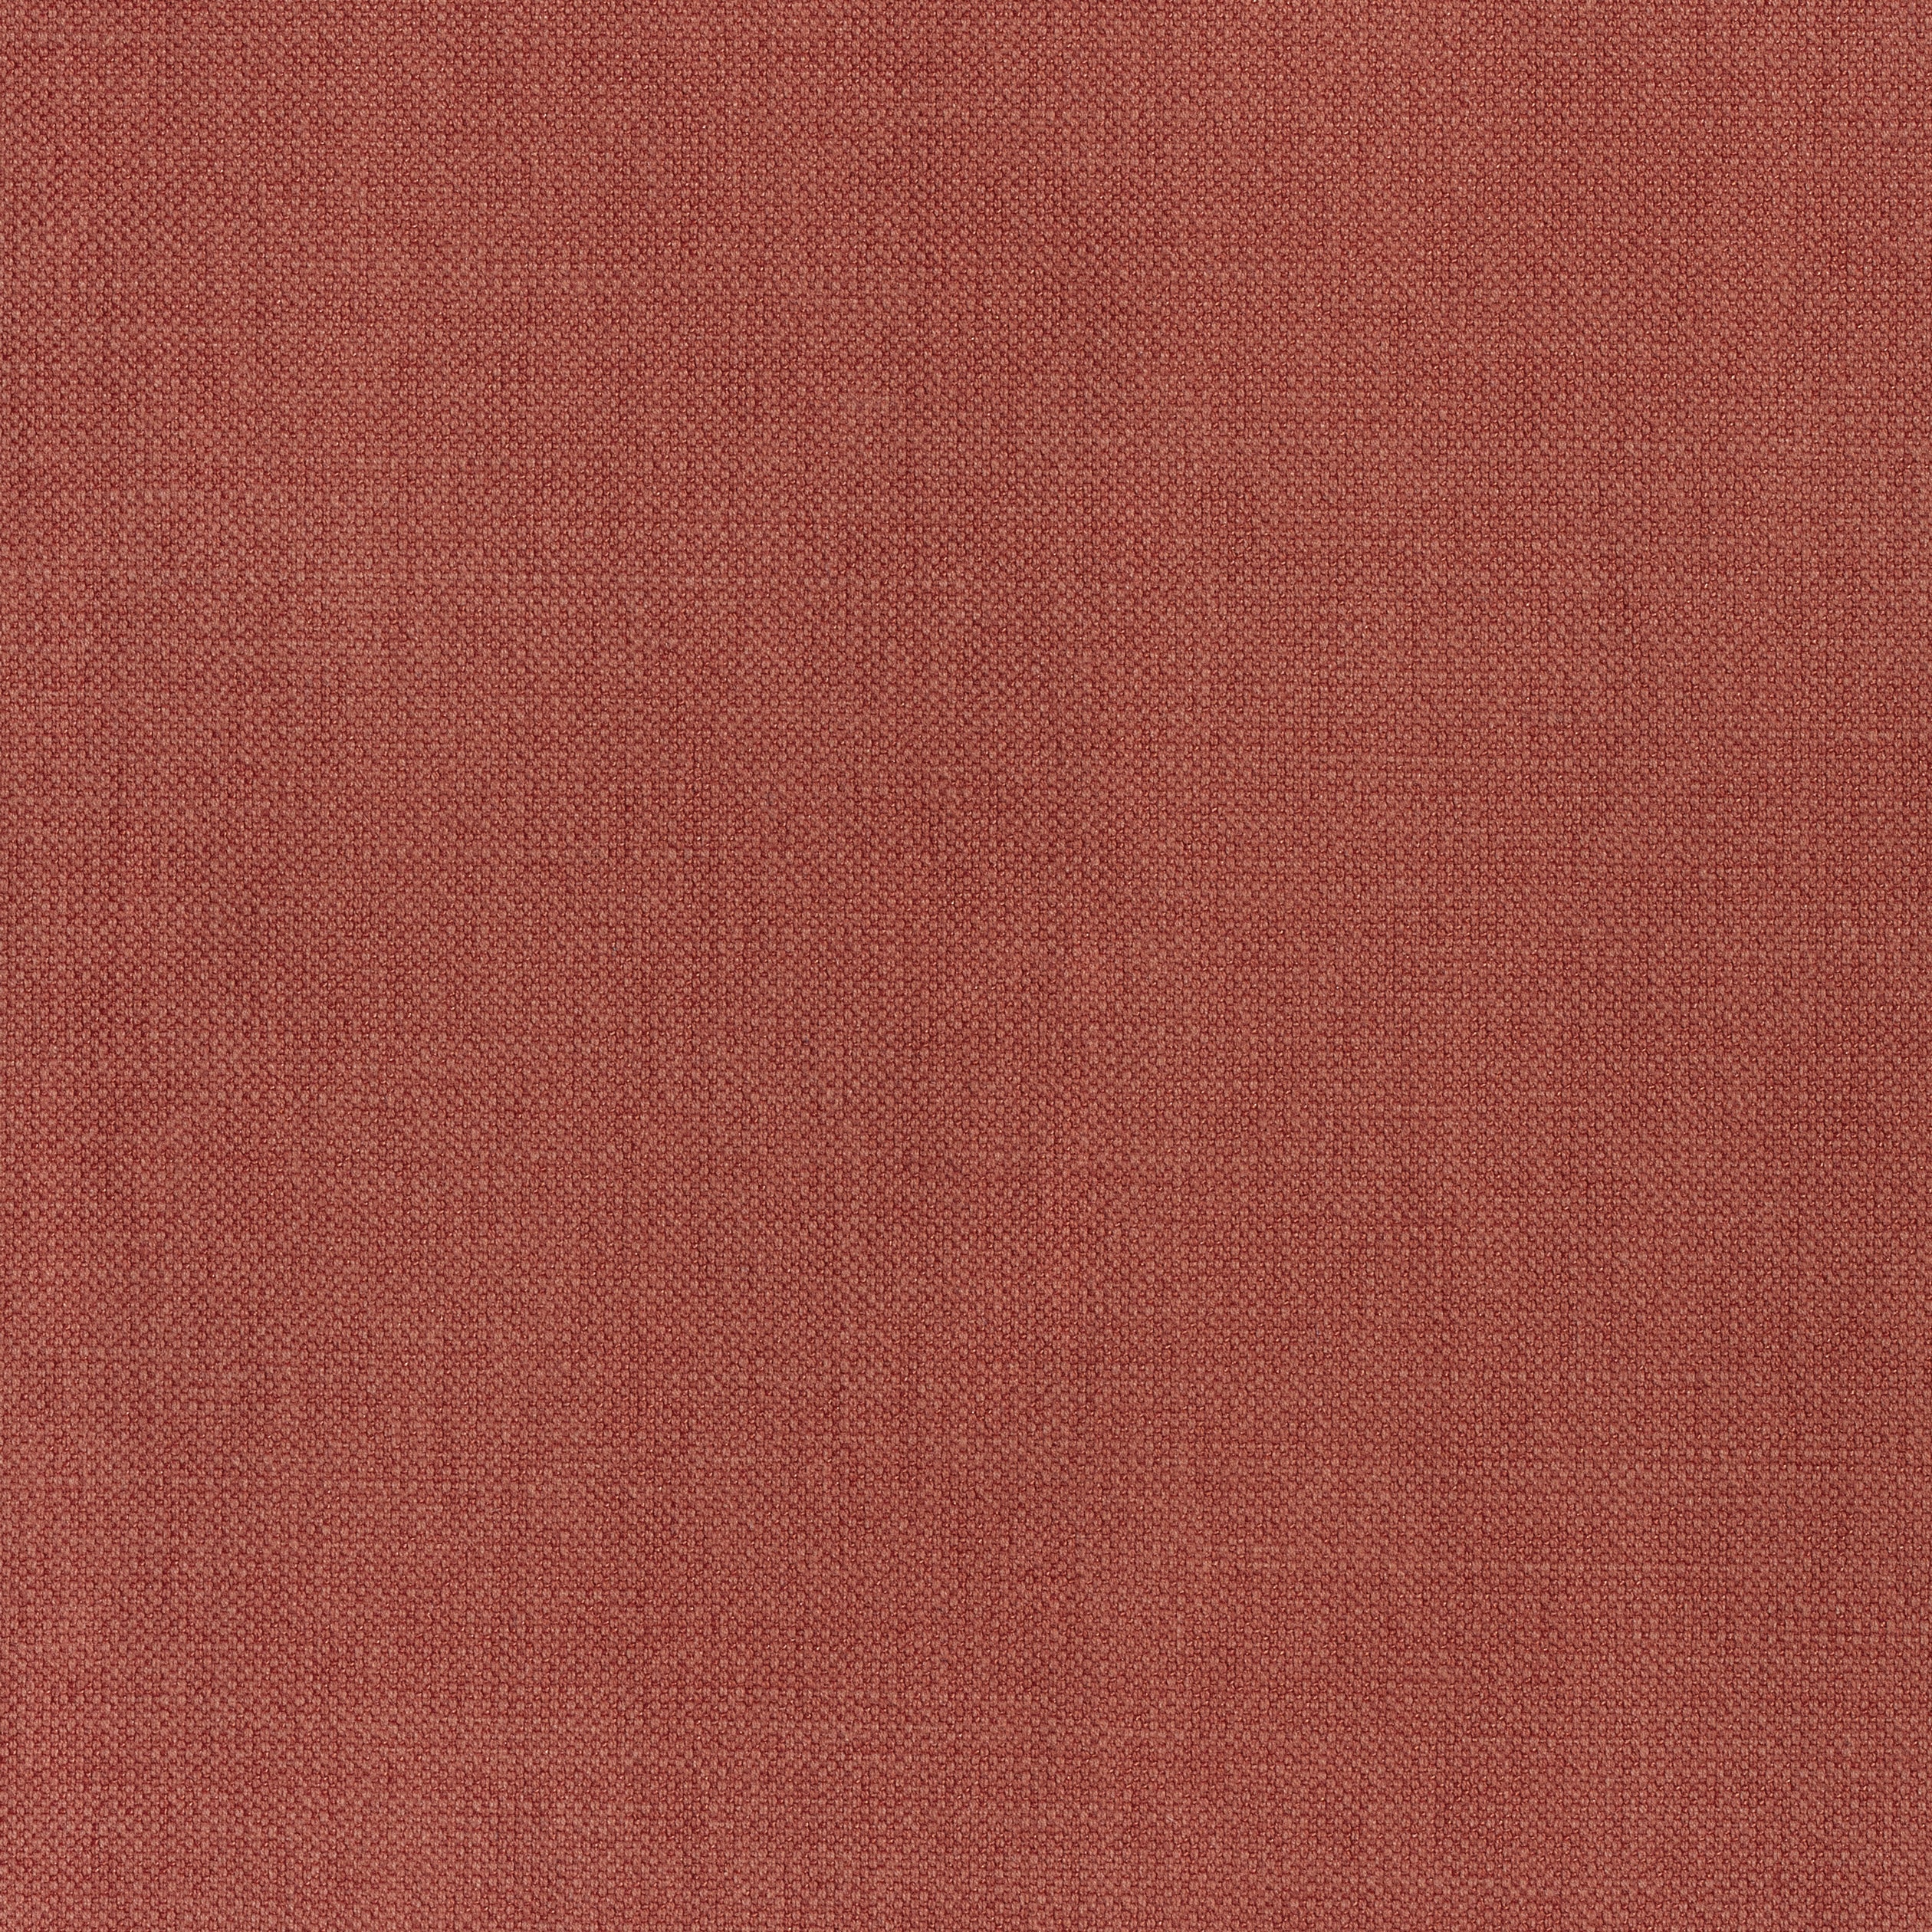 Prisma fabric in sangria color - pattern number W70127 - by Thibaut in the Woven Resource Vol 12 Prisma Fabrics collection